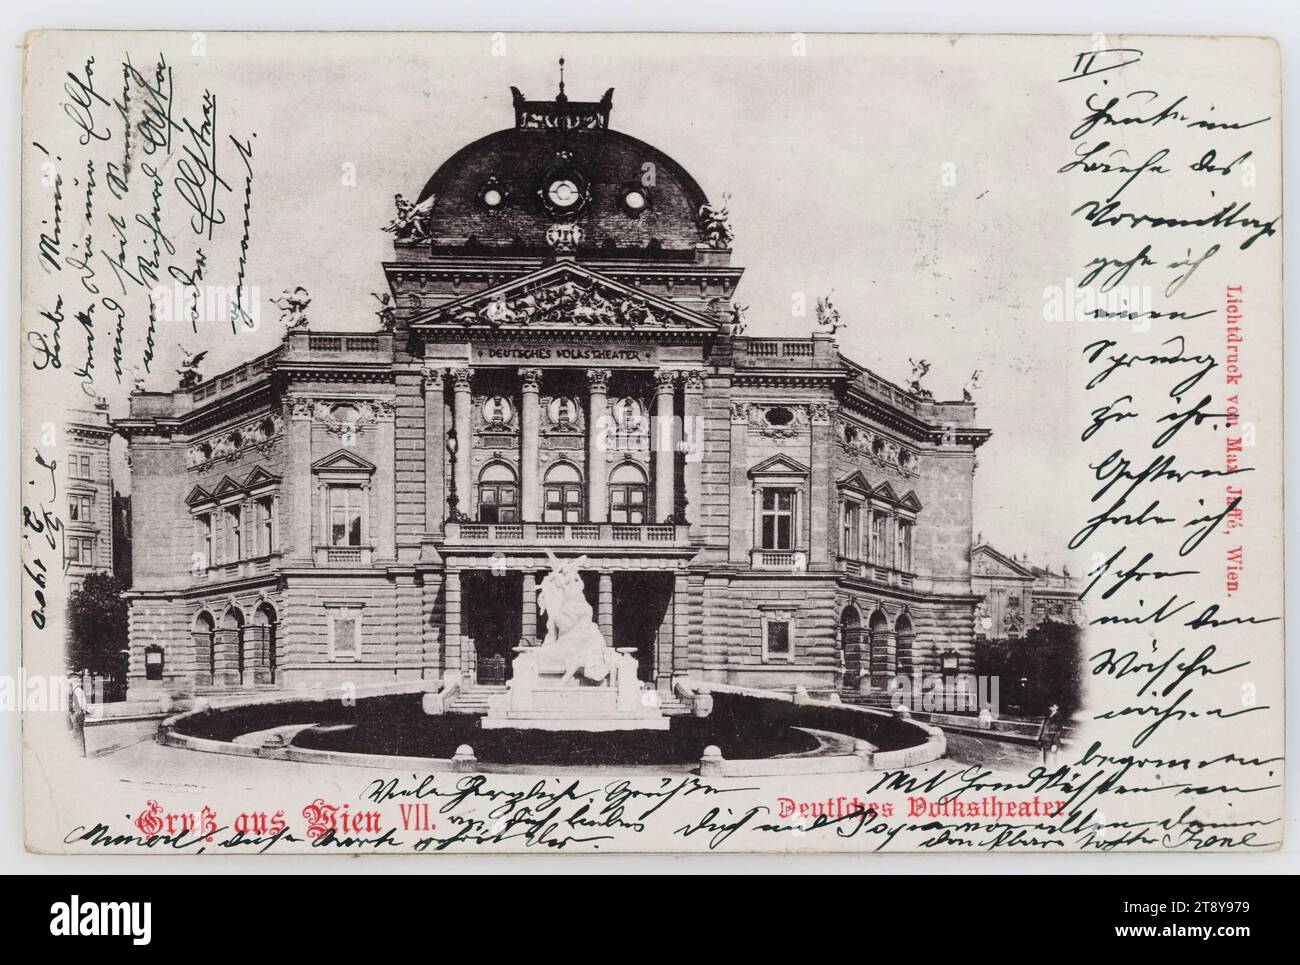 7th, Burggasse 2 - Volkstheater, picture postcard, Max Jaffé (1845-1939), producer, 1900, coated cardboard, collotype, inscription, FROM, Vienna, TO, Gries - Bolzano, ADDRESS, Wohlgeboren Frau, in Gries - Bolzano, Hôtel 'Mon séjour', Sud Tirol, NACHRICHT, d. 5., 2. 1900, Dear Mimi!, Just think Elsa is called since Sunday by Richard Asta or Elster. Today in the course of the morning I go a jump to her. Yesterday I already started sewing laundry. With hand kisses to you and dad from all your Irene, Many warm greetings to you dear Mimerl, this card belongs to the ., theater Stock Photo